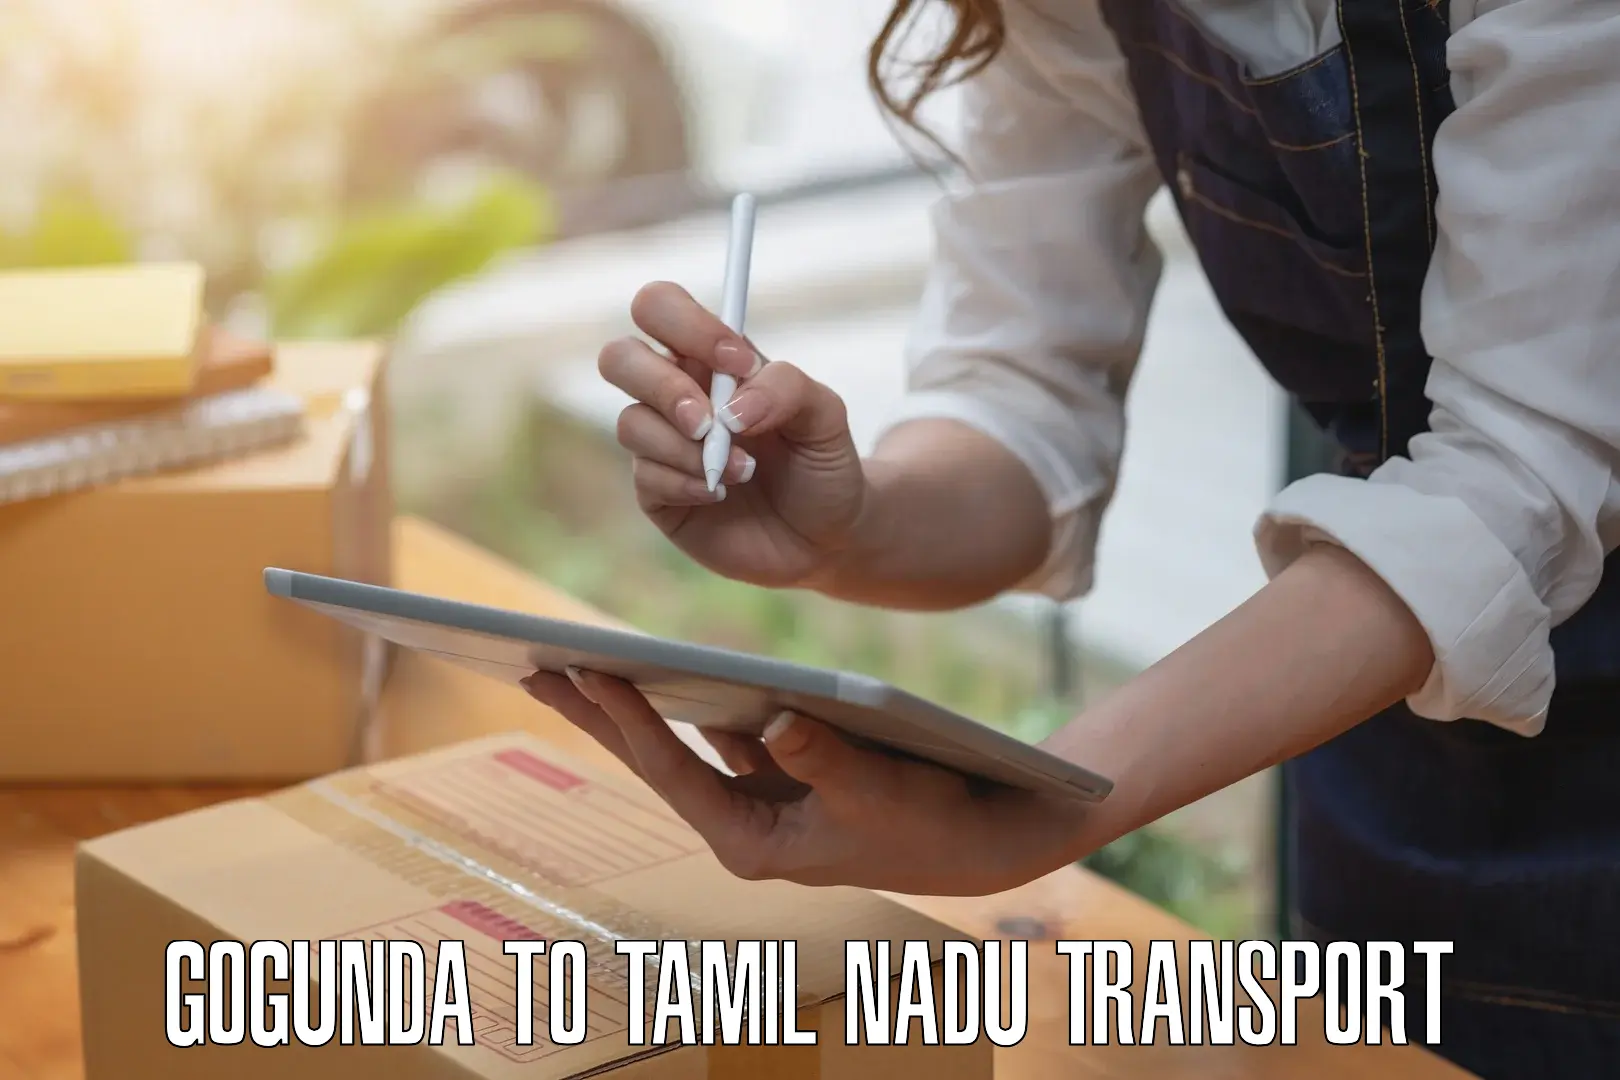 Road transport online services Gogunda to Ooty